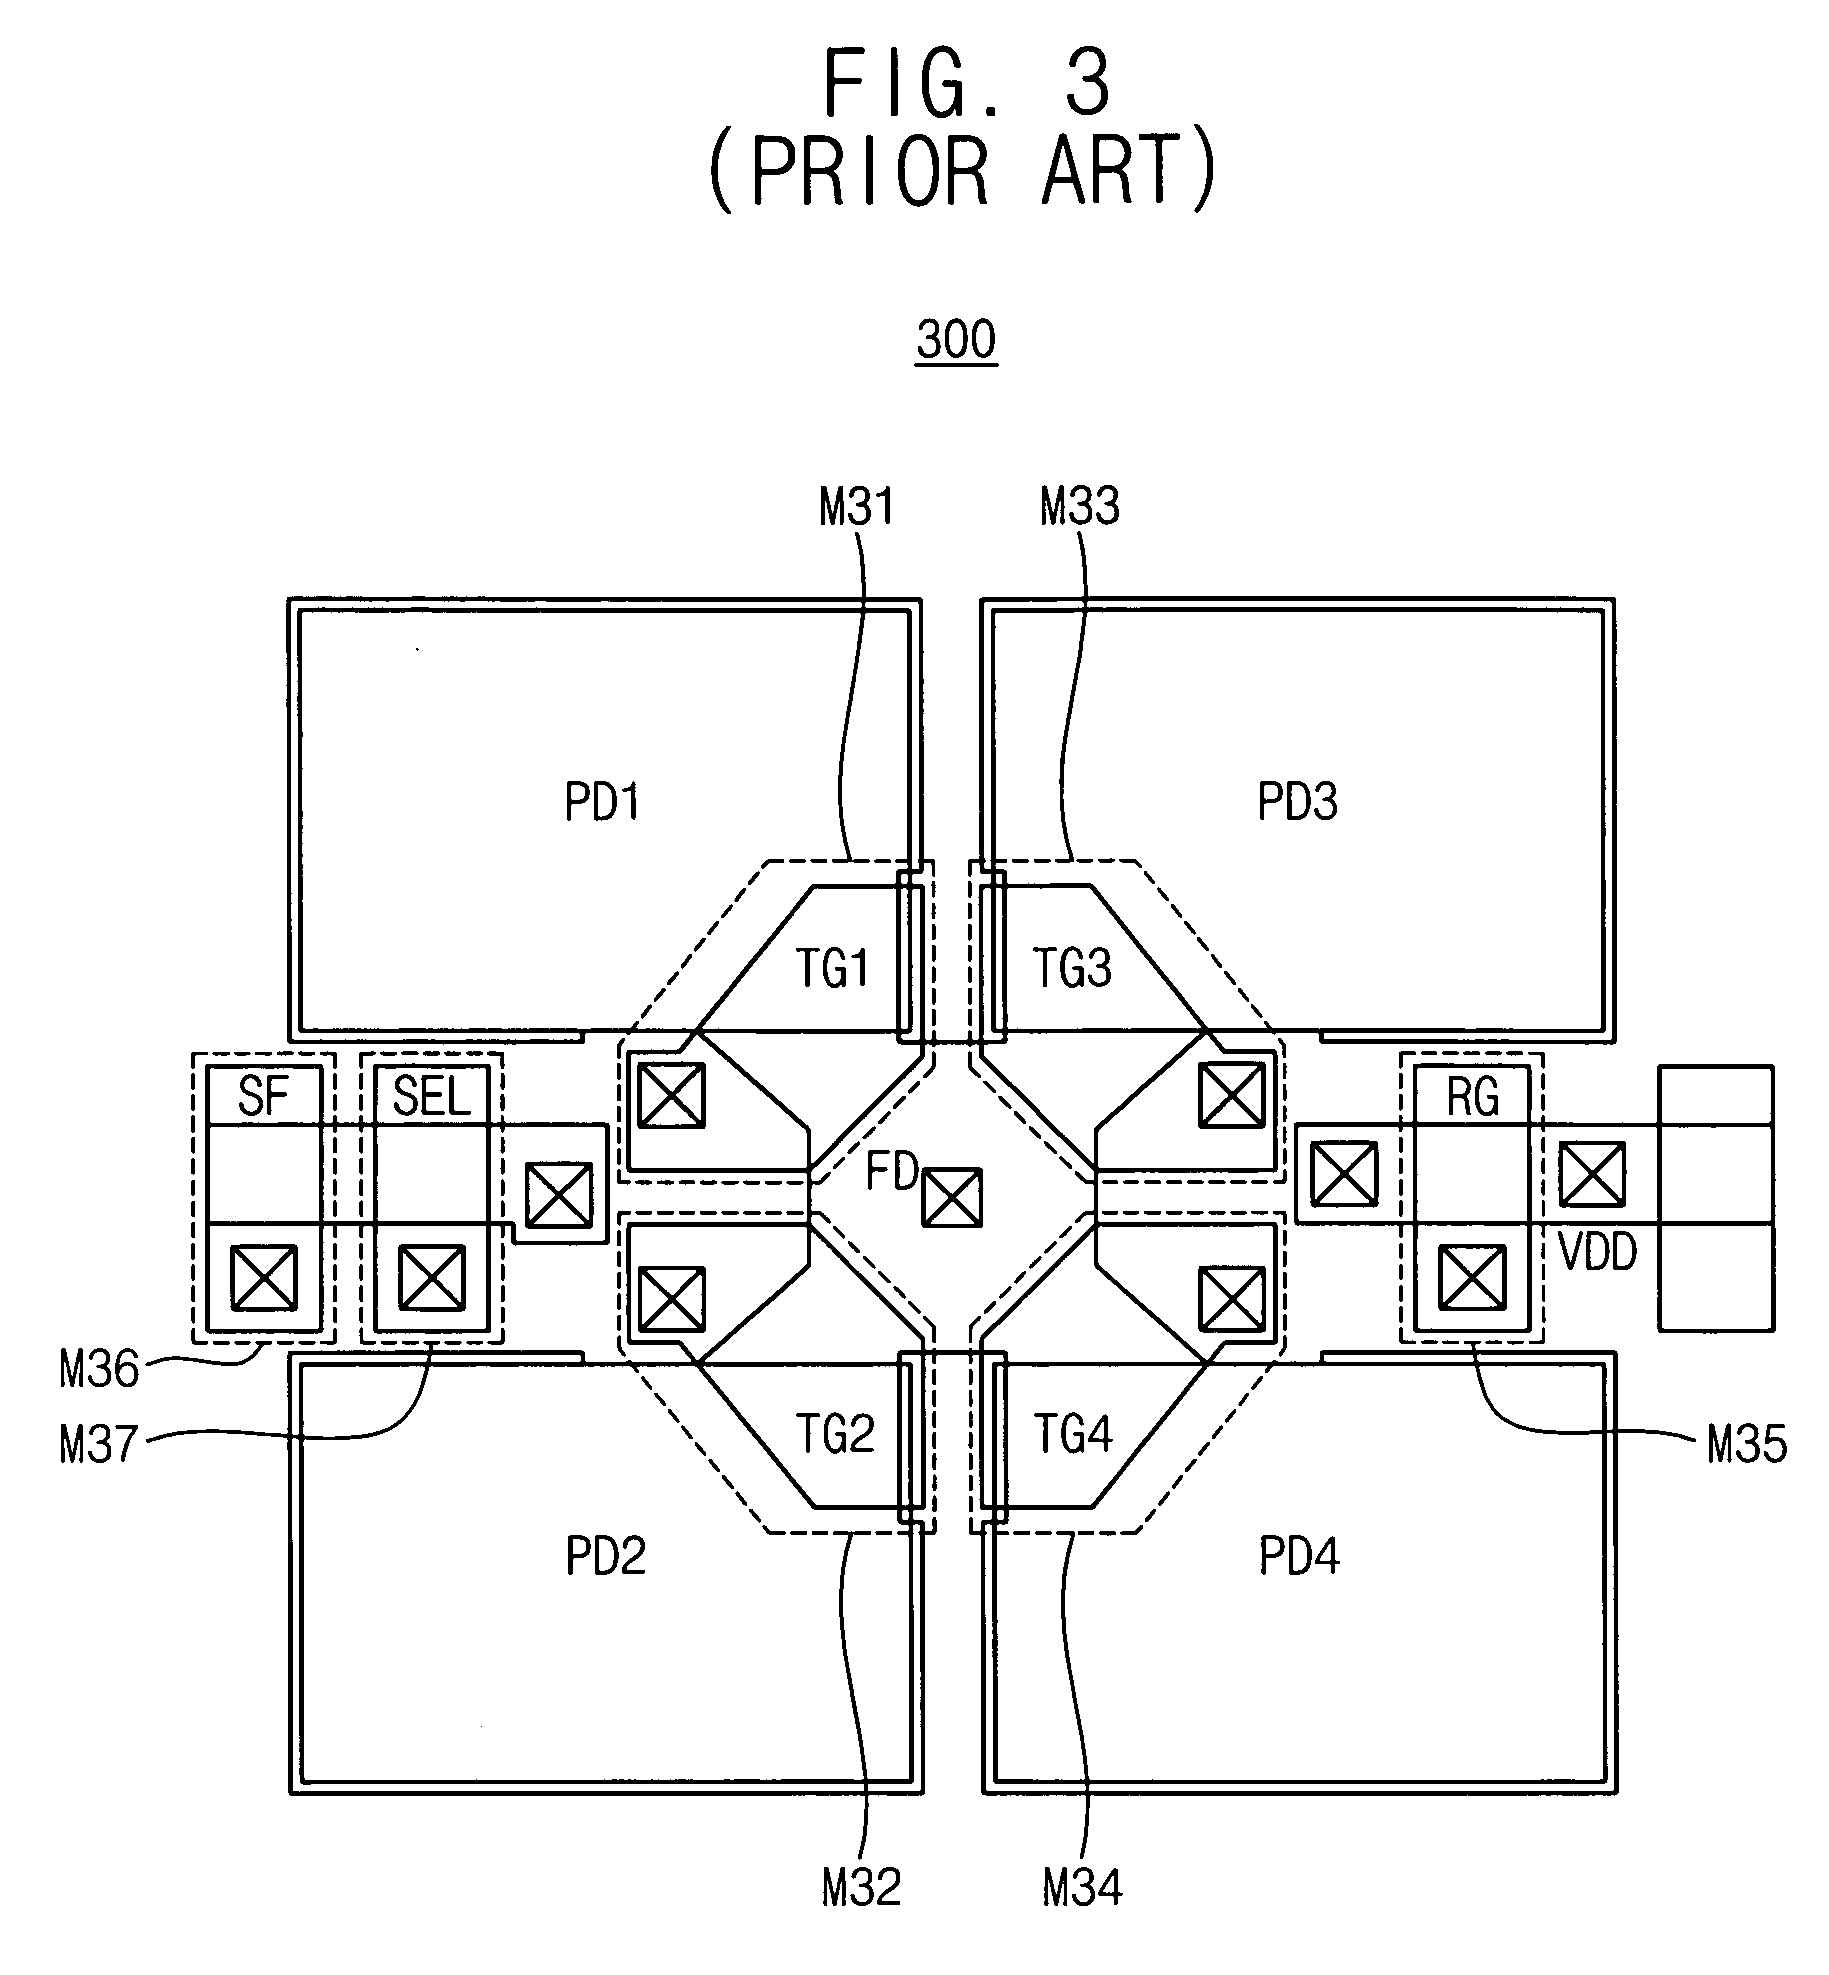 CMOS sensor array with a shared structure